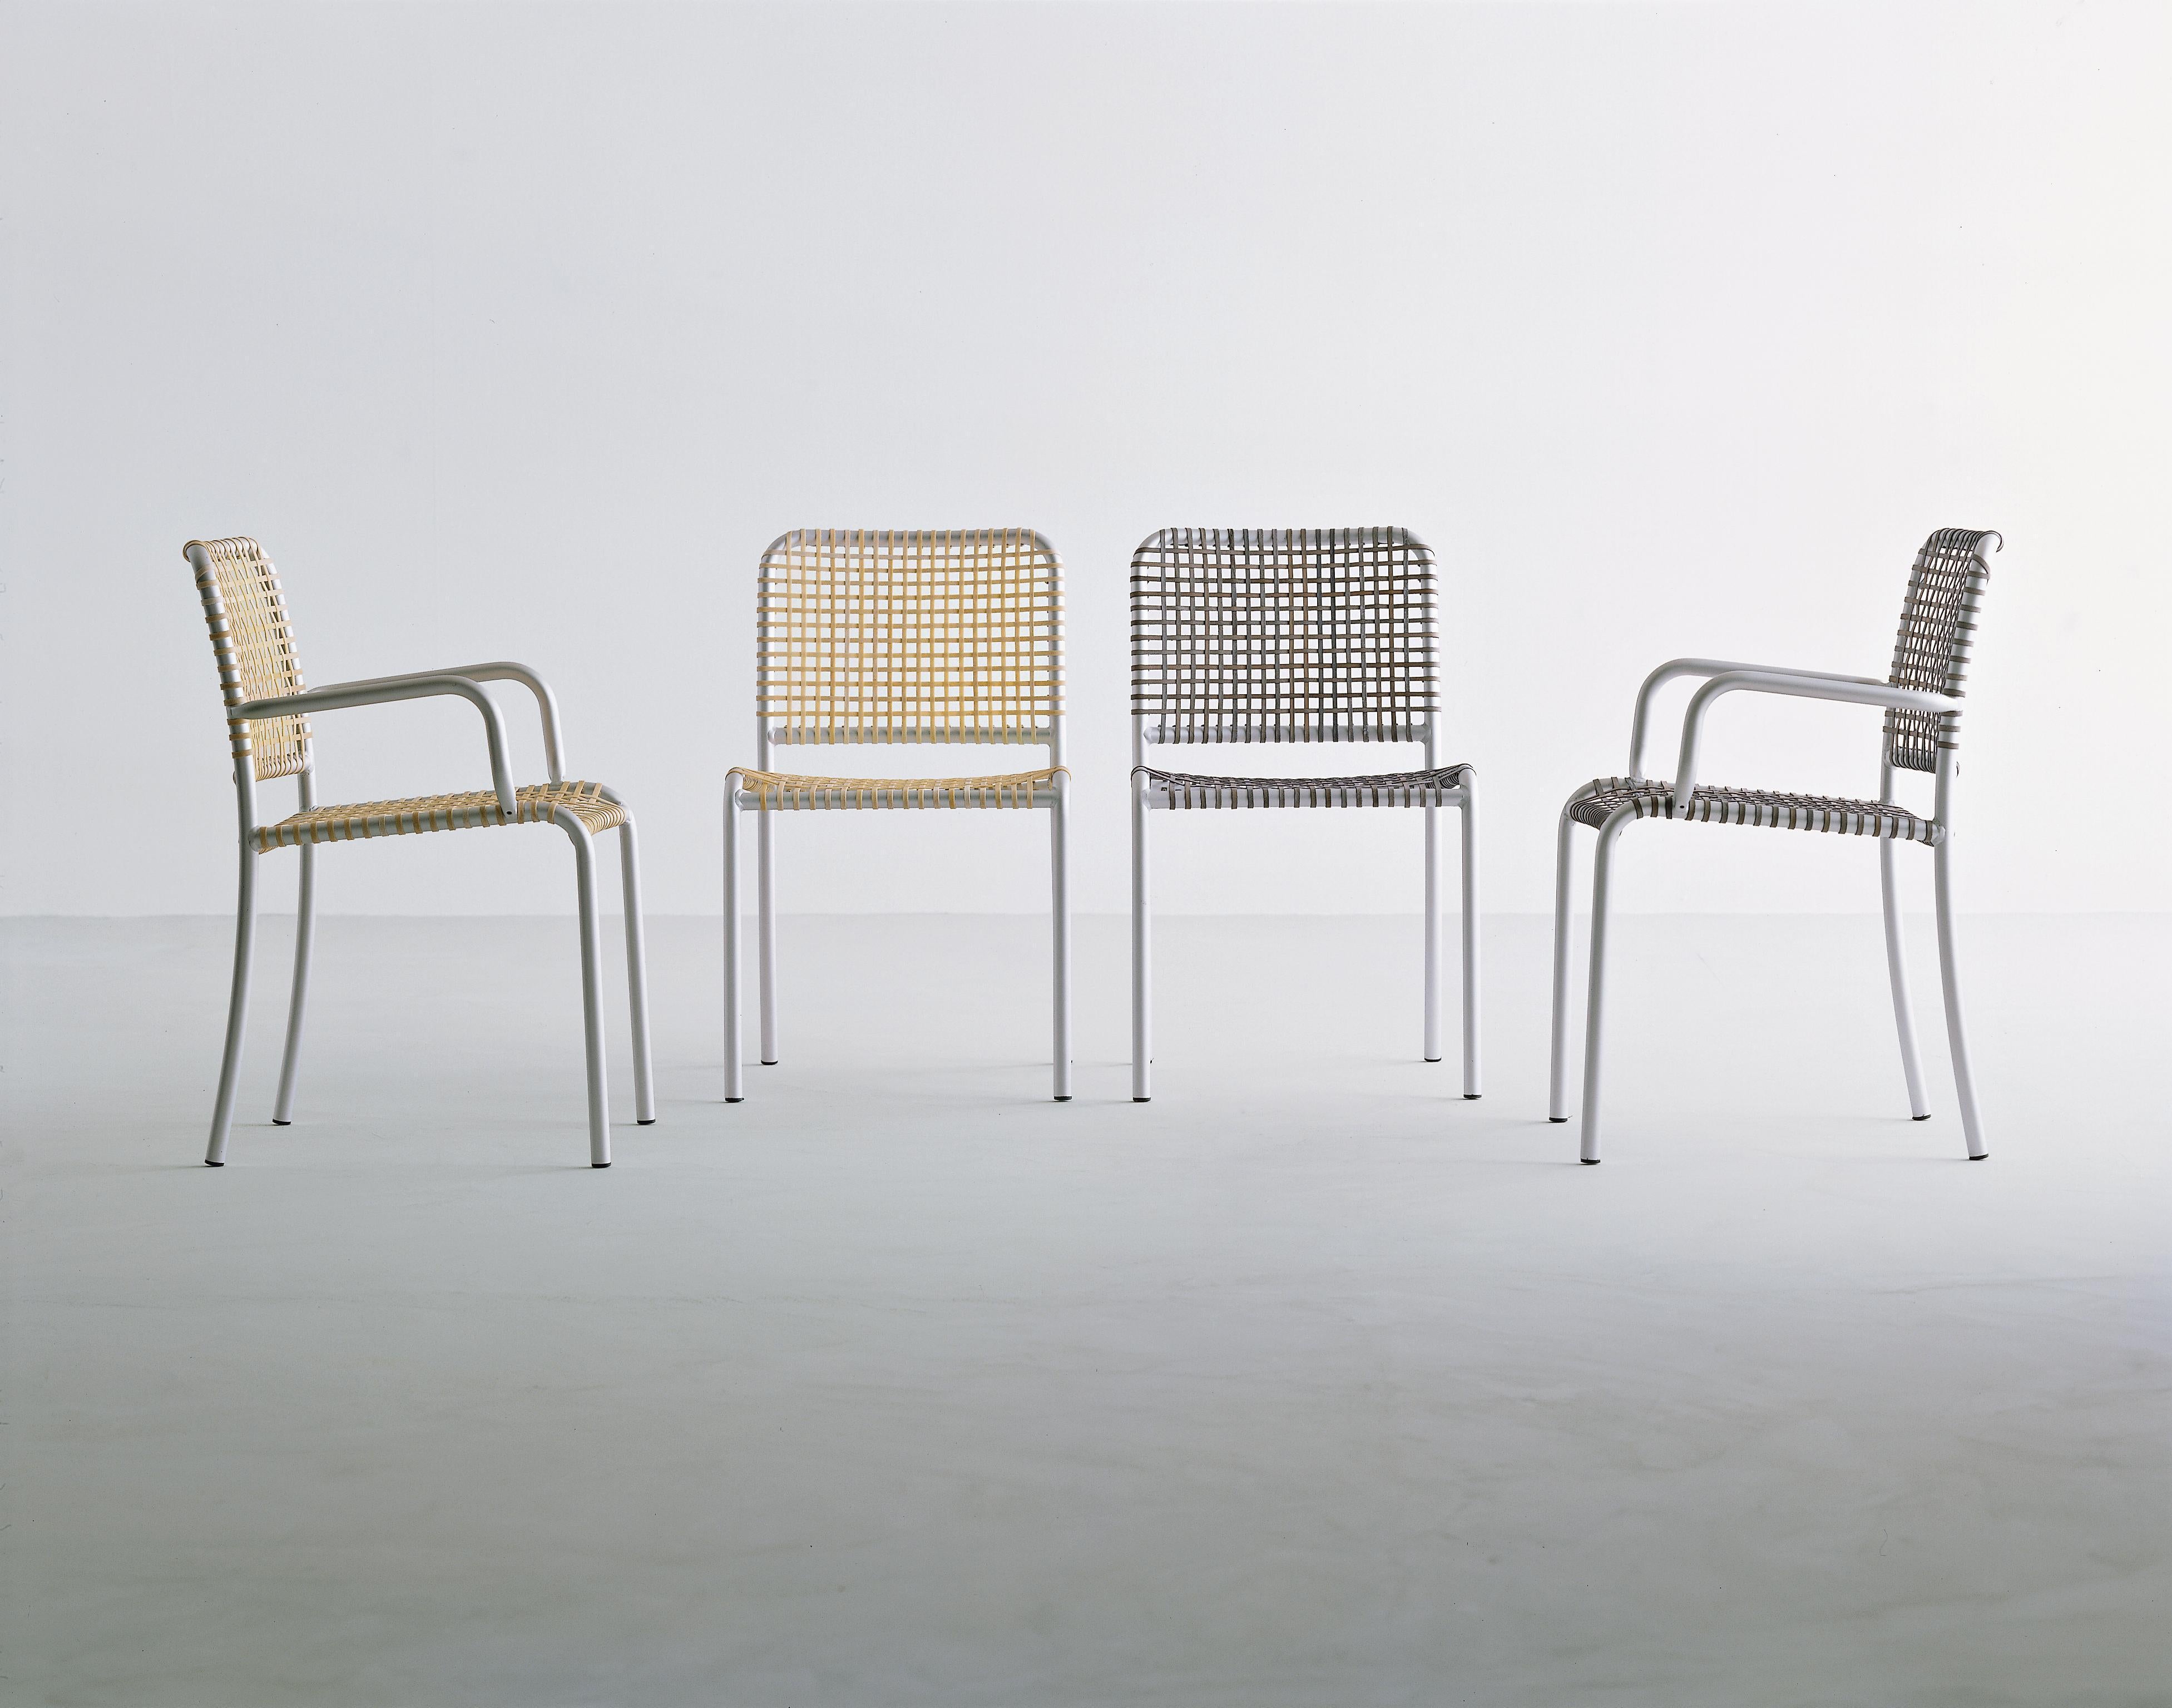 Versatile and comfortable, the Allu chair family combines the lightness and essentiality of the anodised aluminium tubular structure with a dynamic mix of textures, created by the weaving in natural or grey parchment. Able to fit into any